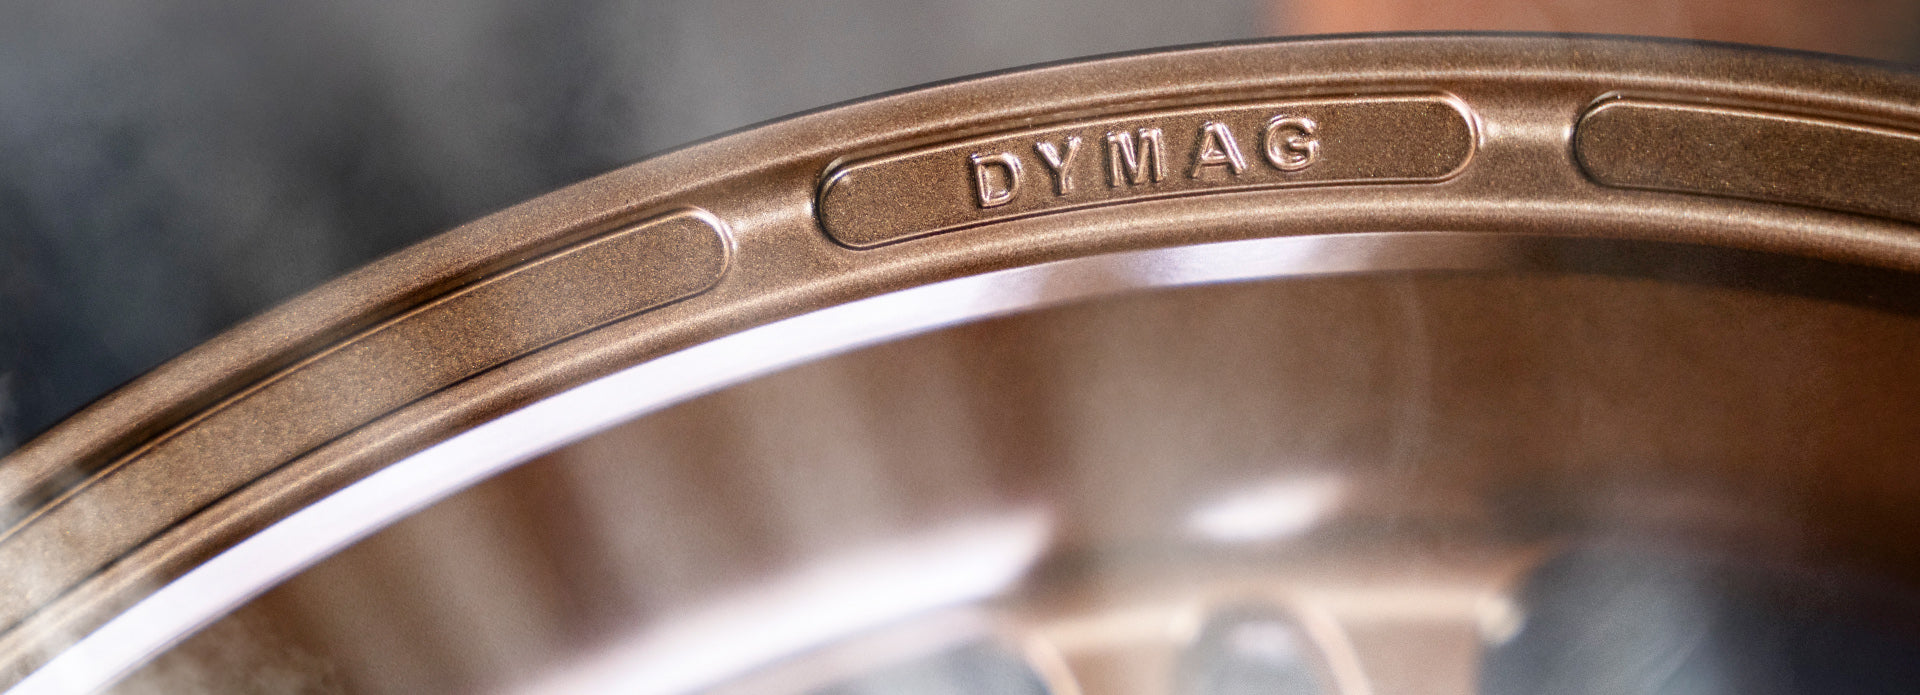 Extreme close-up of the rim of a bronze Dymag racing wheel, showcasing the embossed 'DYMAG' logo and detailed texture of the metal surface, with a blurred dark background enhancing the focus on the wheel's craftsmanship.